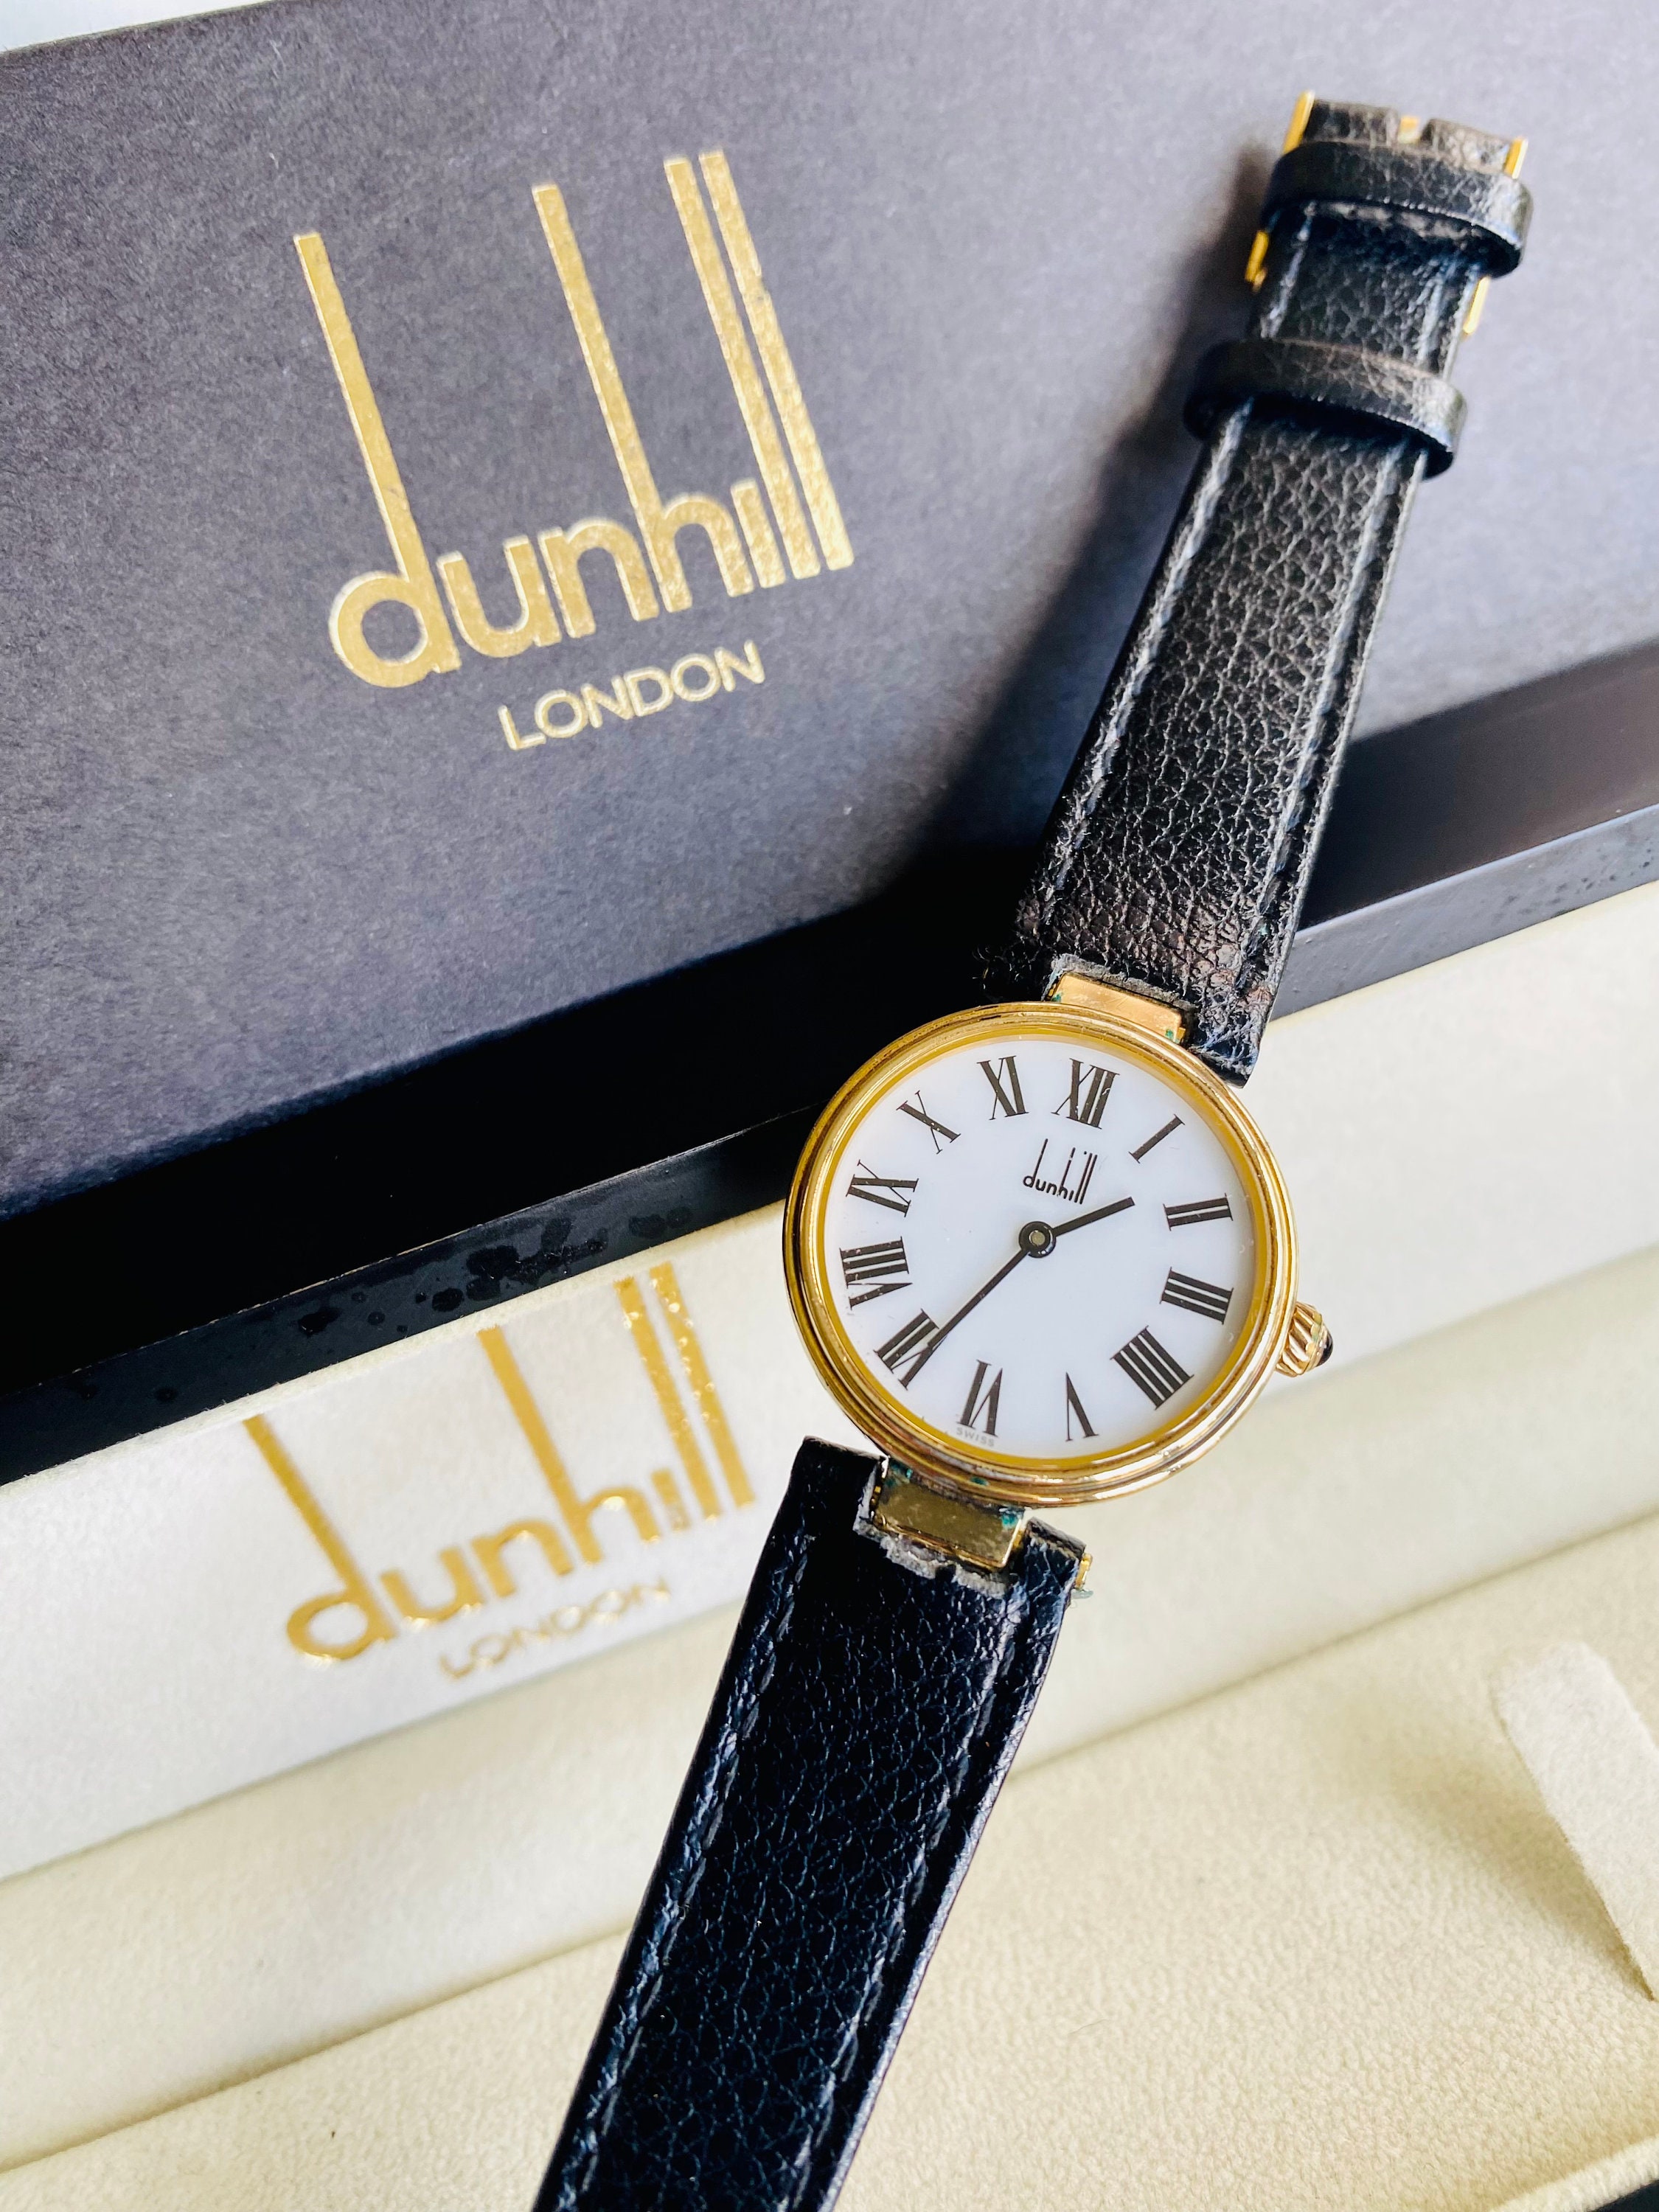 My Desire to wear Alfred Dunhill Facet Watch - YouTube